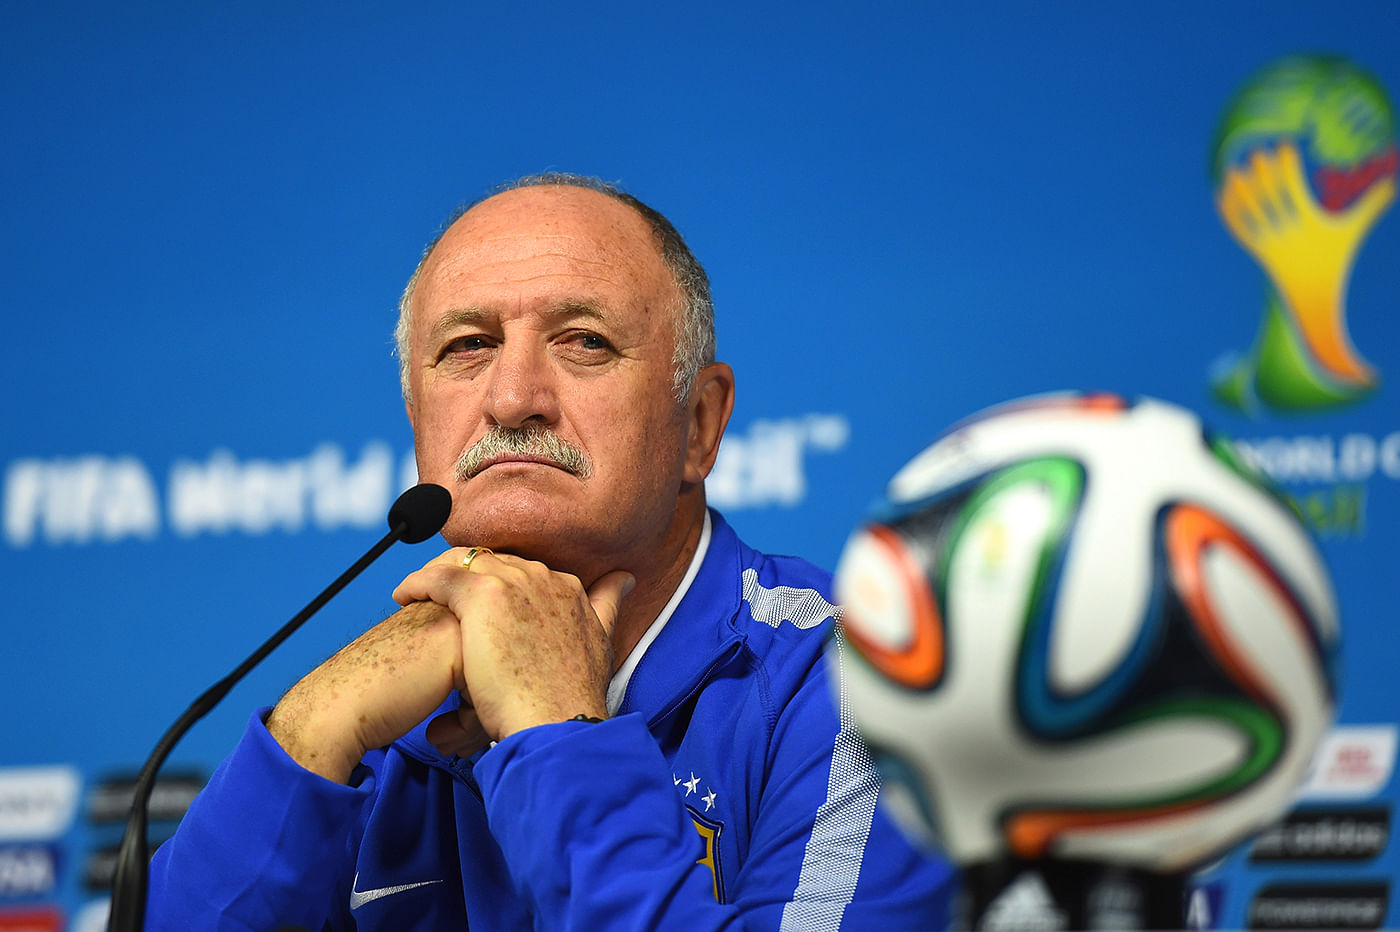 Manager Luiz Felipe Scolari of Brazil looks on during a Brazil press conference ahead of the 2014 FIFA World Cup Brazil opening match against Croatia at Arena de Sao Paulo on June 11, 2014 in Sao Paulo, Brazil. Photo: Getty Images